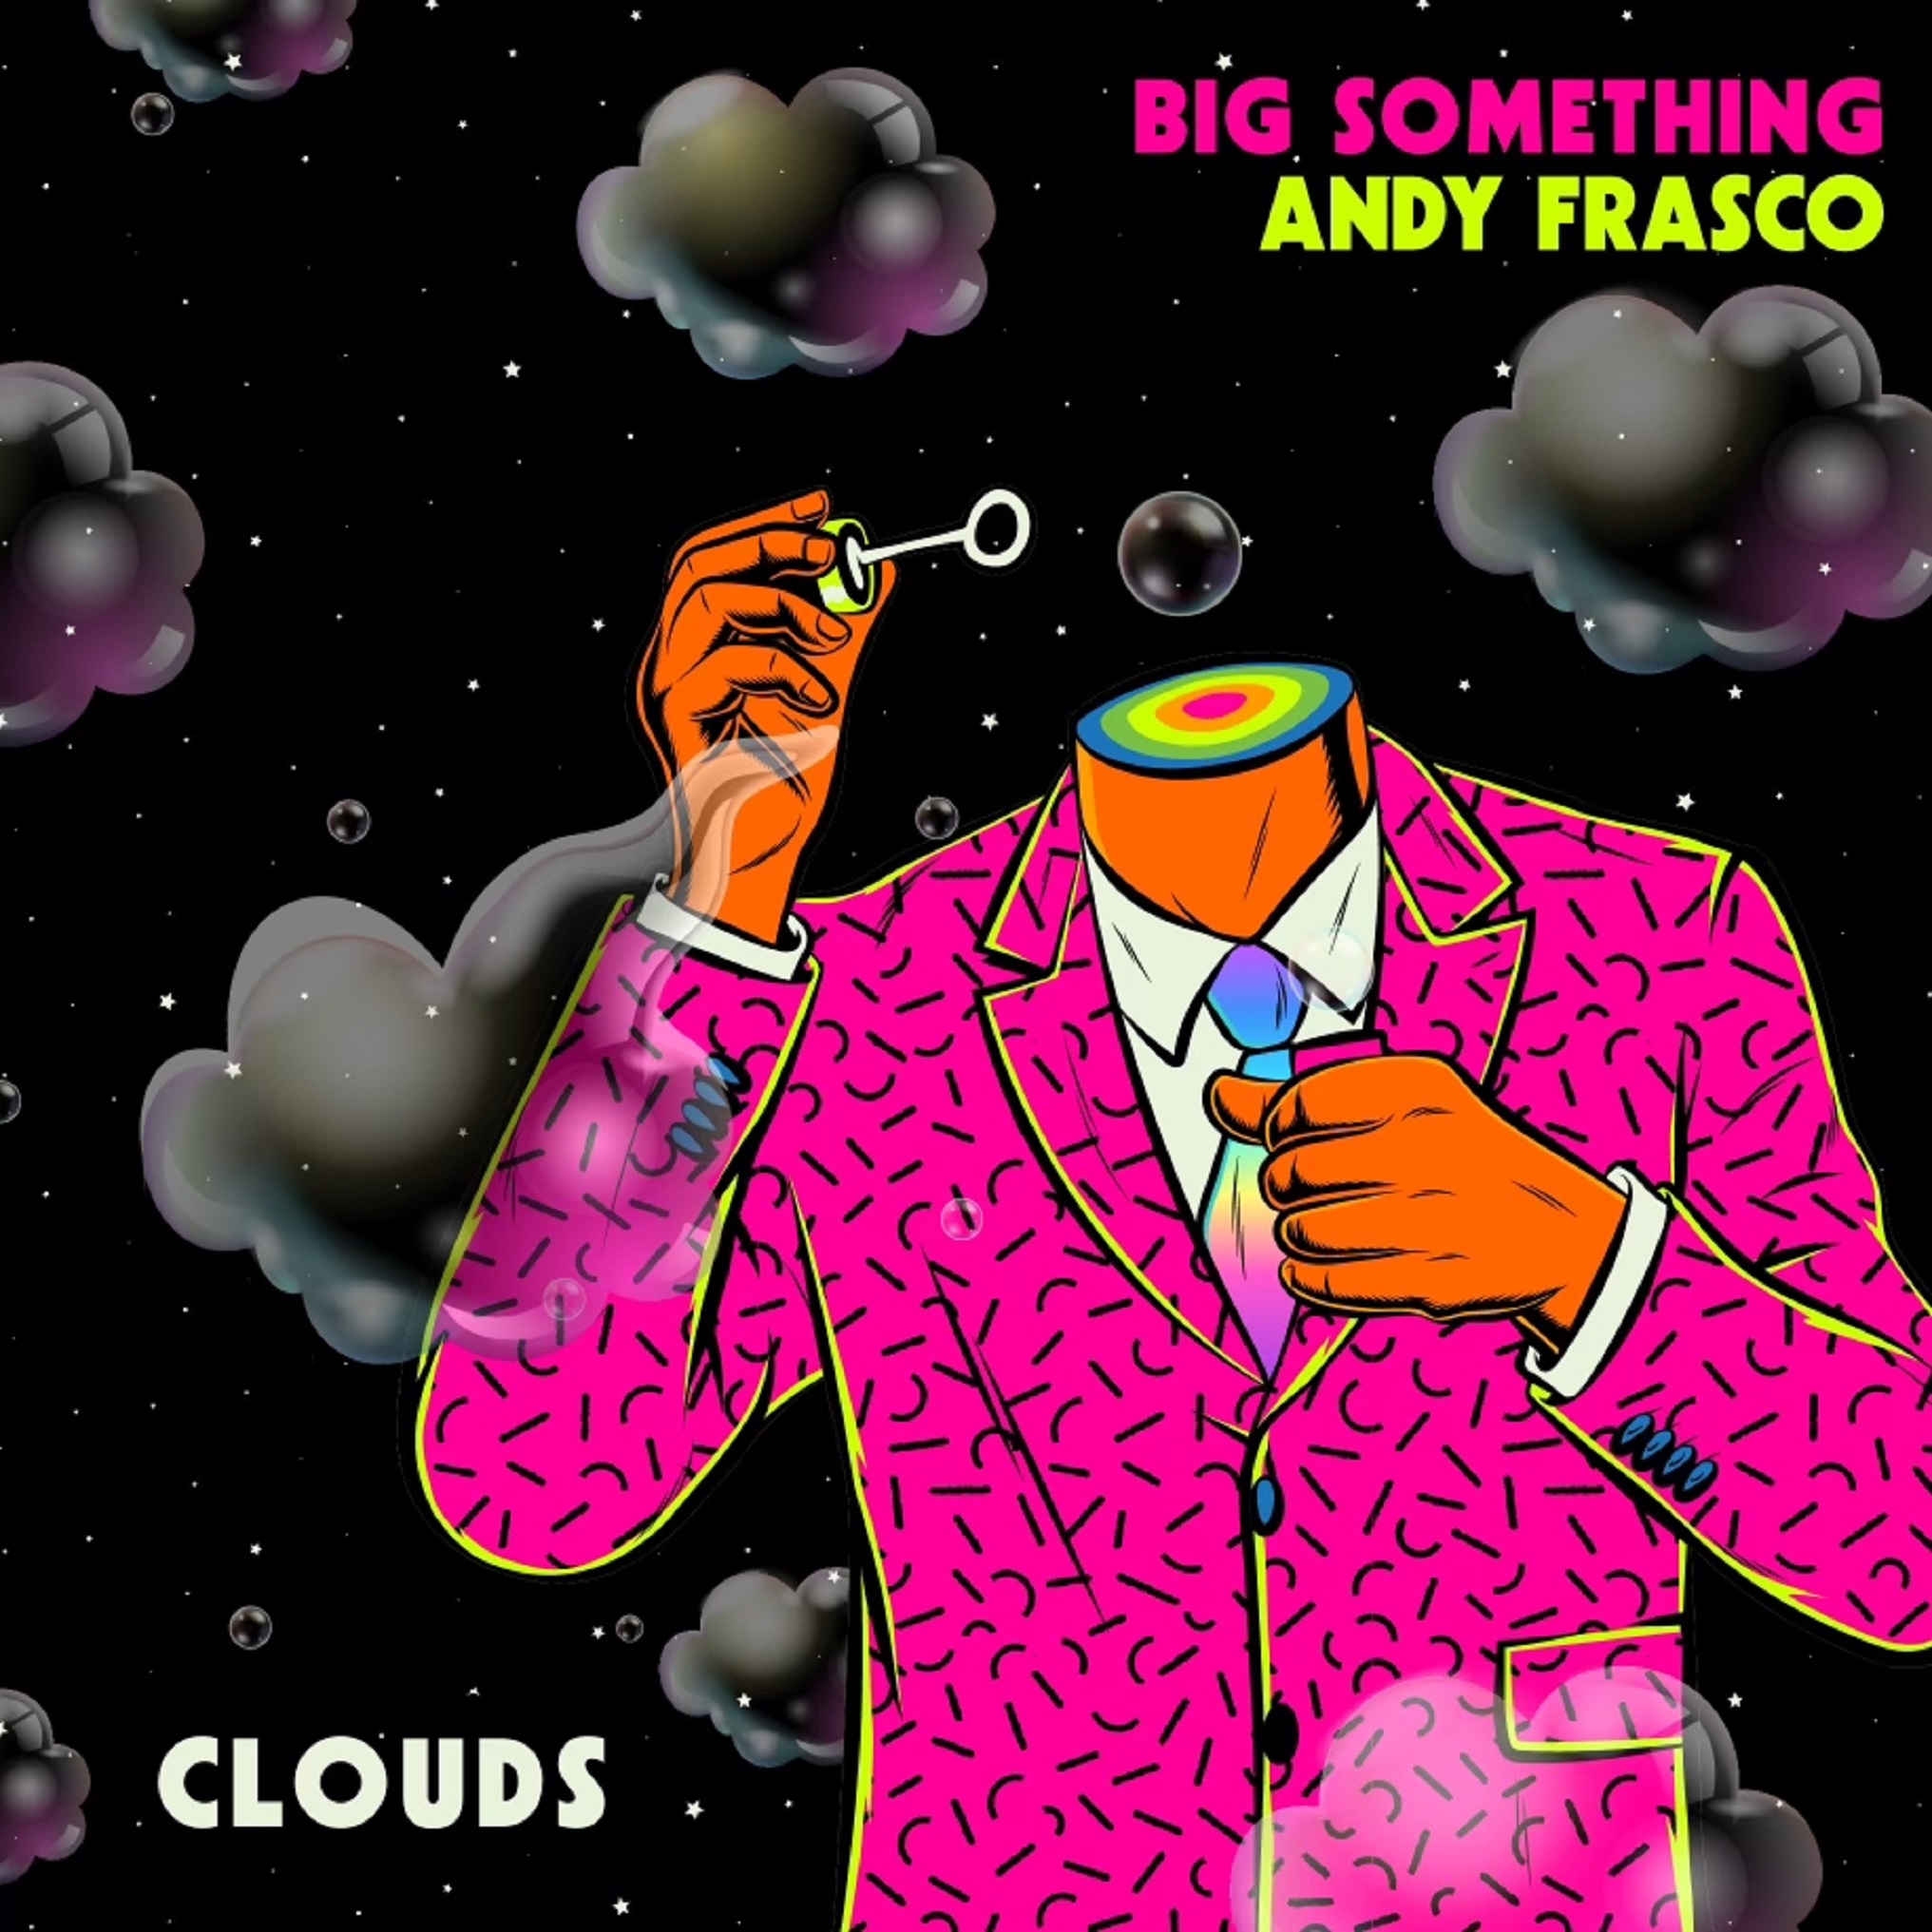 Big Something Enlists Andy Frasco For Ruminative New Single, “Clouds” + Frasco-Directed Music Video